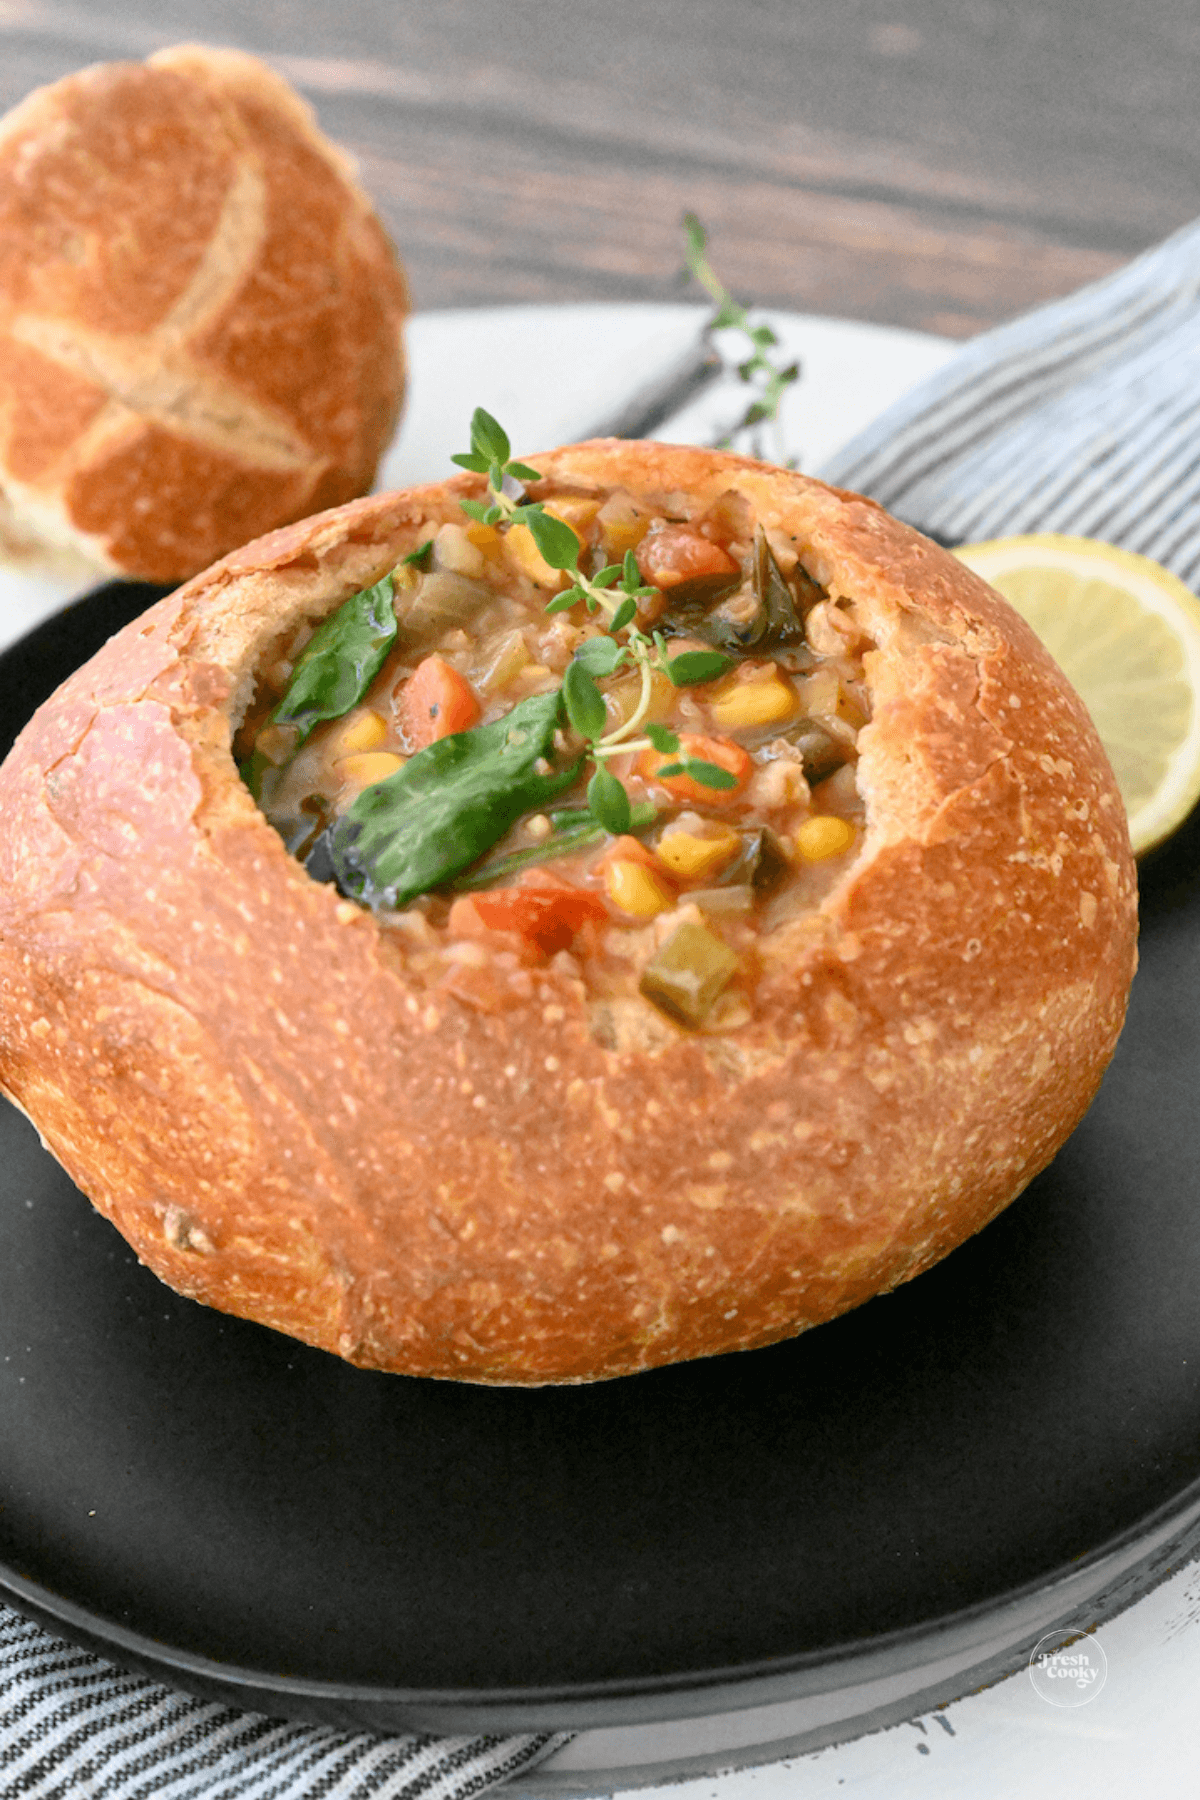 Panera Bread 10 vegetable soup in bread bowl with top in background for eating.